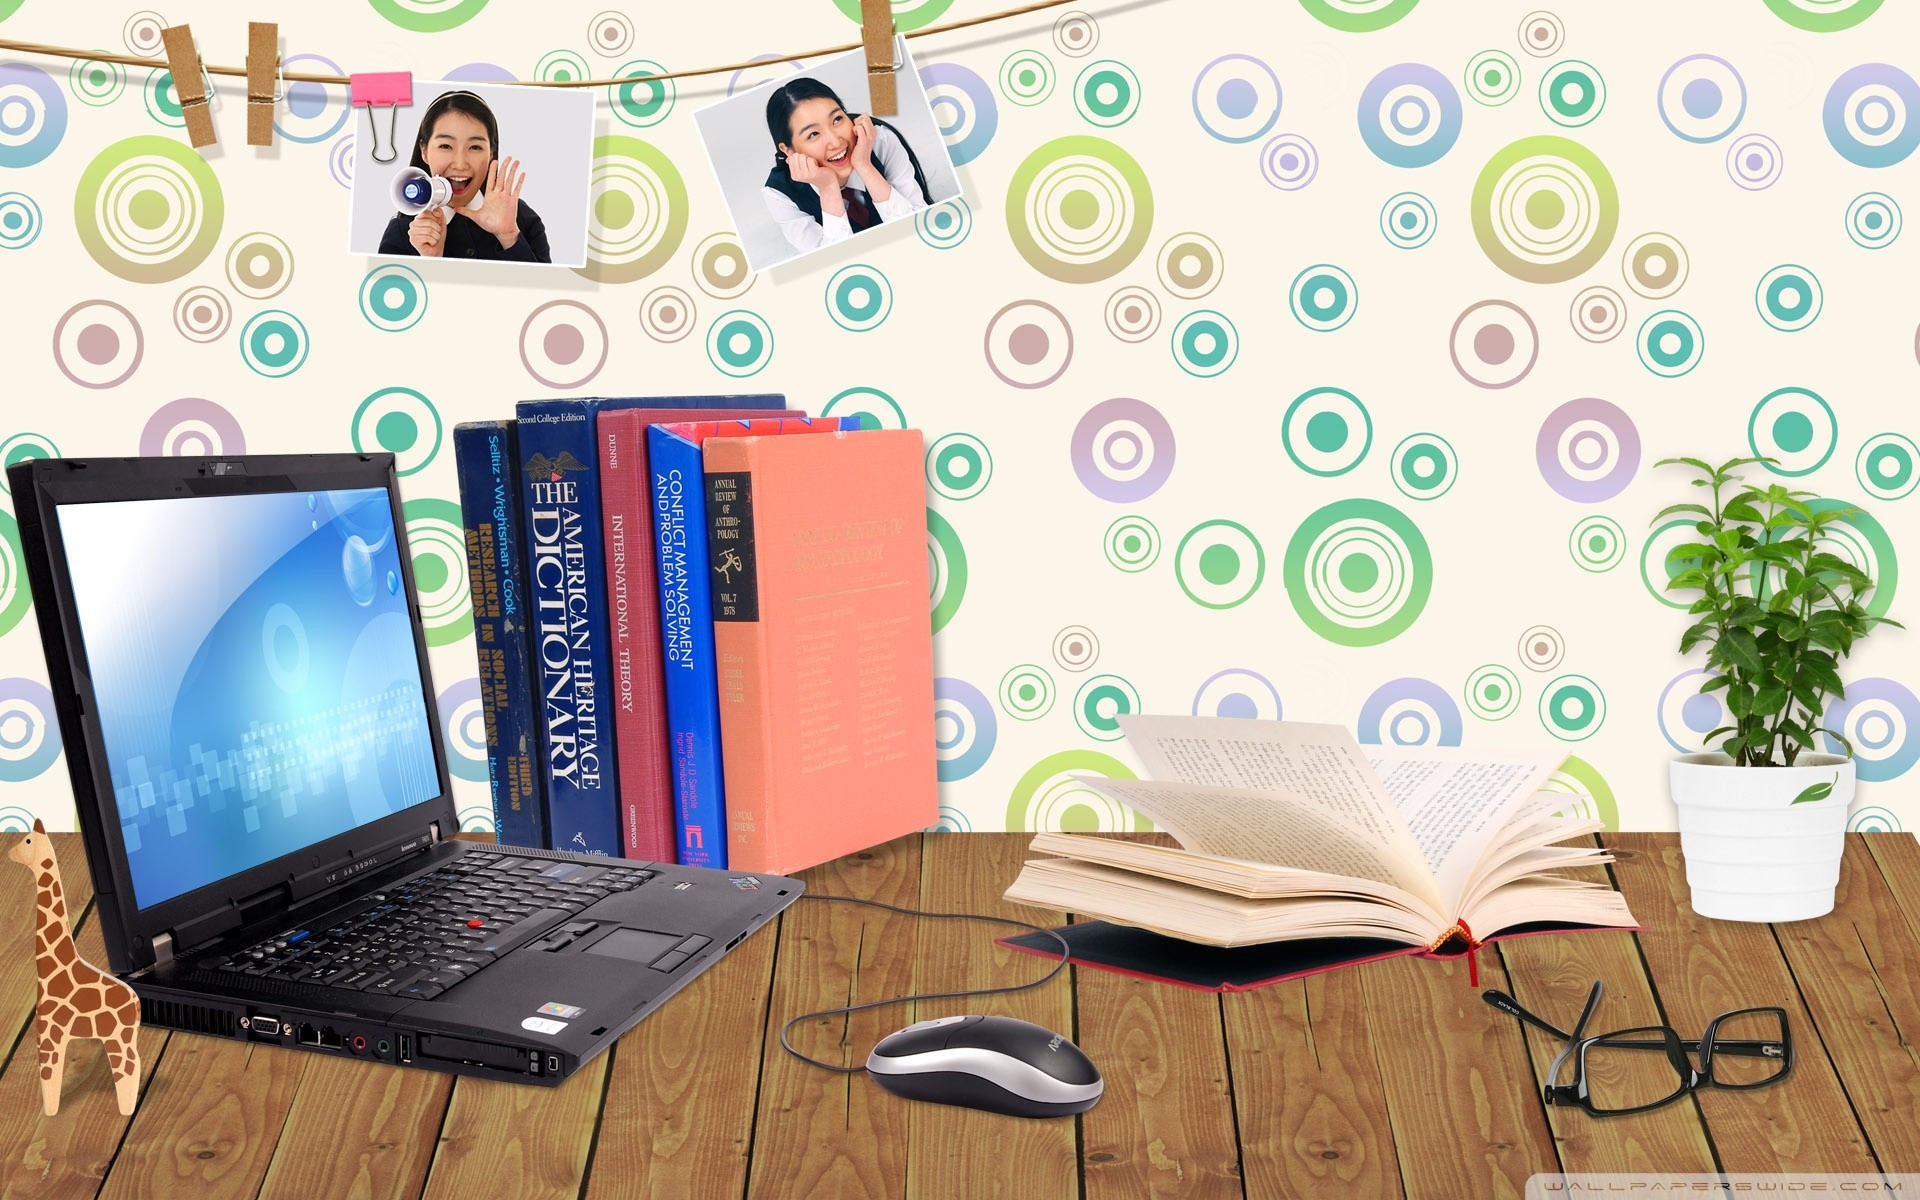 student wallpaper,product,laptop,desk,technology,electronic device